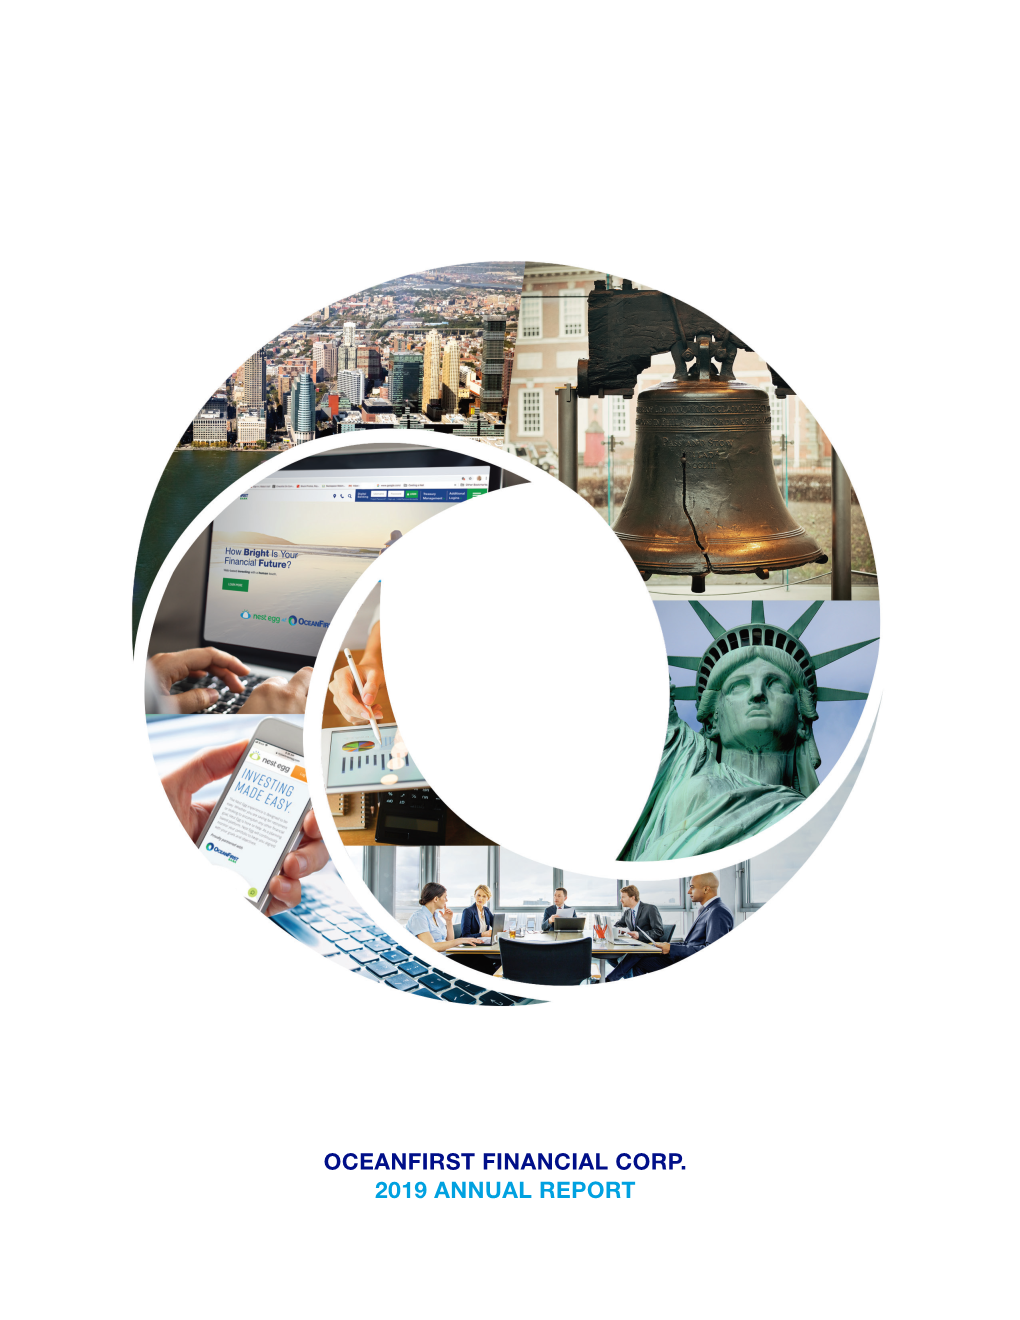 Oceanfirst Financial Corp. 2019 Annual Report At-A-Glance